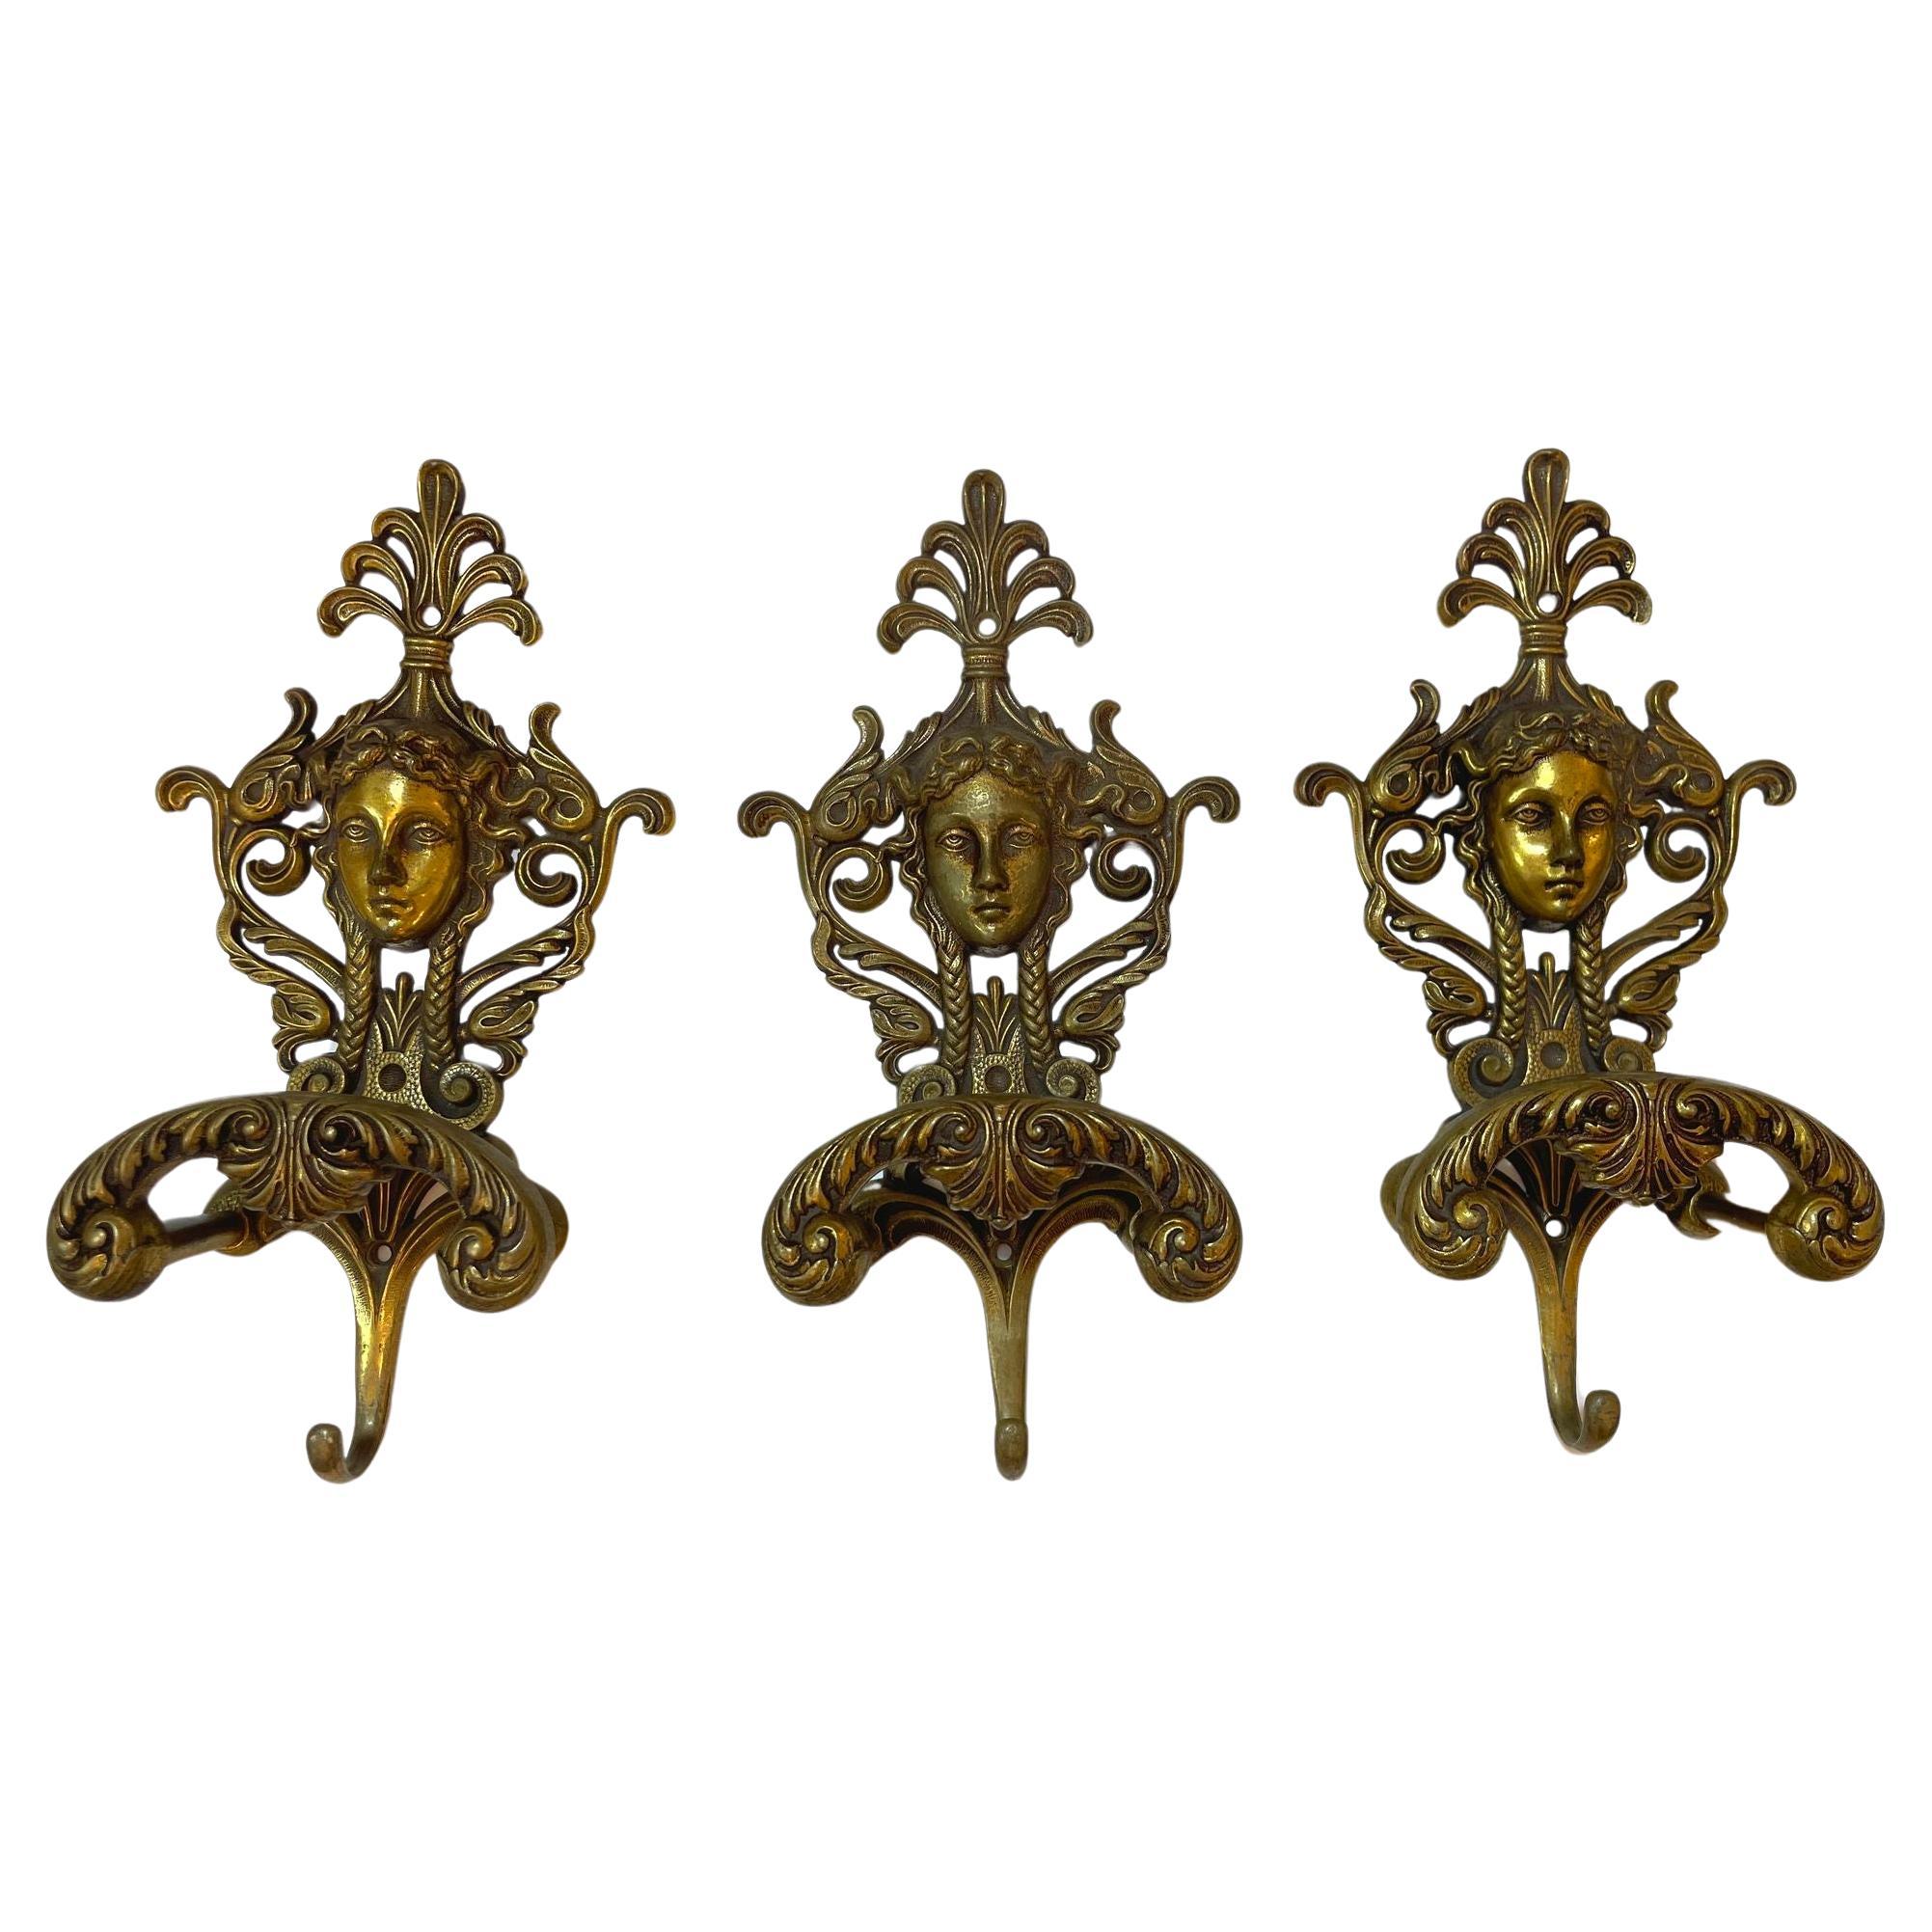 Antique Ornate Italian Figural Architectural Cast Brass Wall Hook Decor Set of 3 For Sale